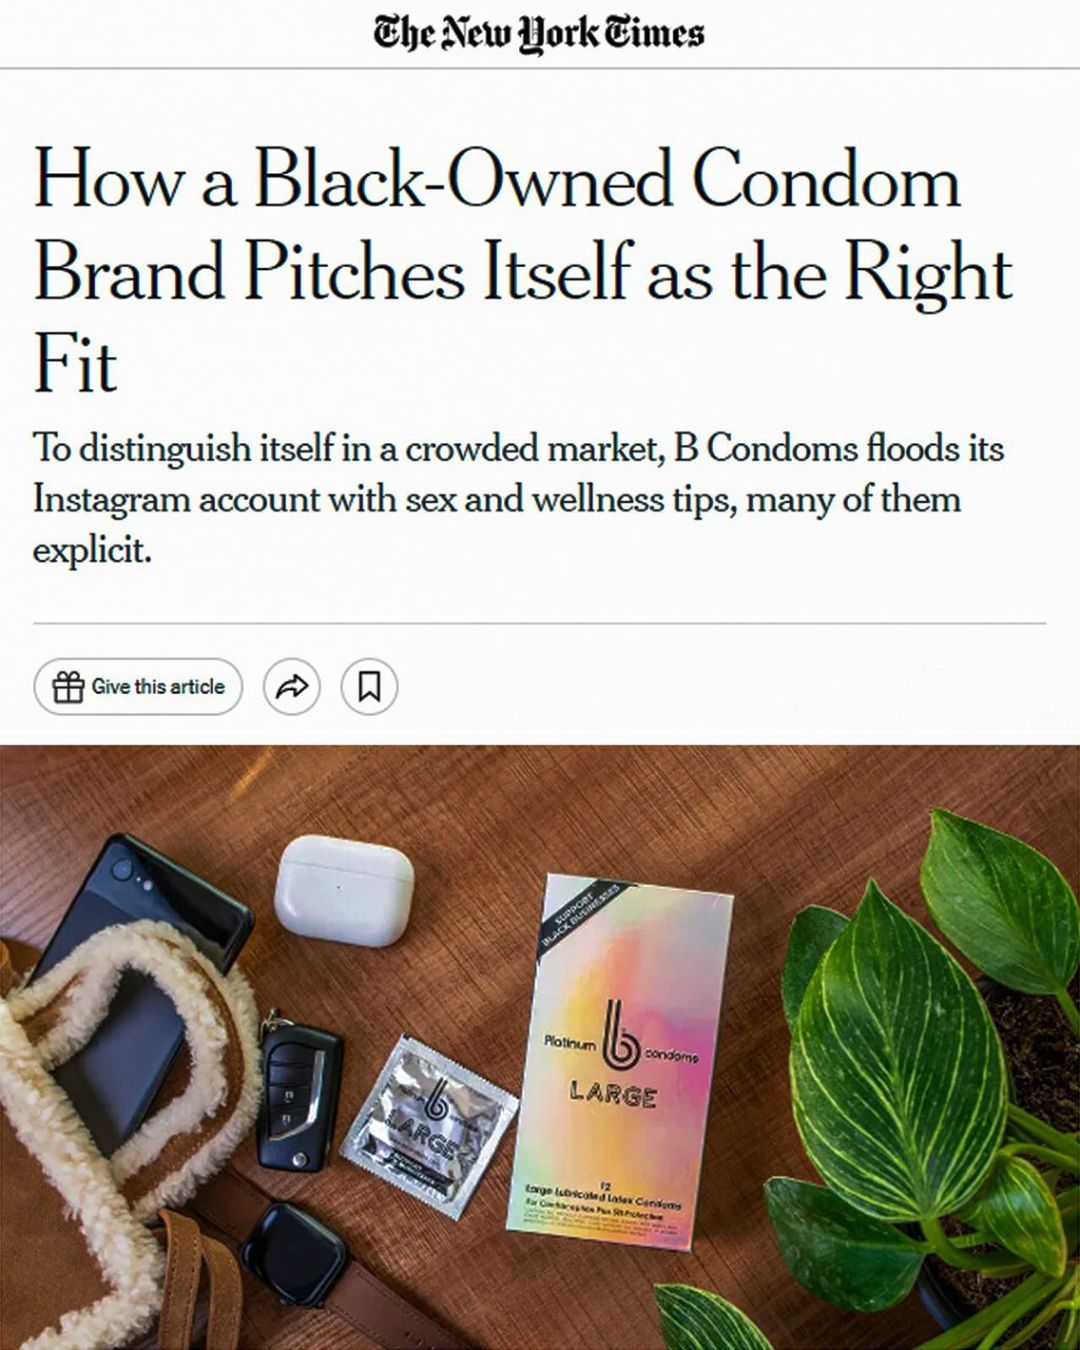 One of the top publications of @bcondoms which has 1.3K likes and 46 comments